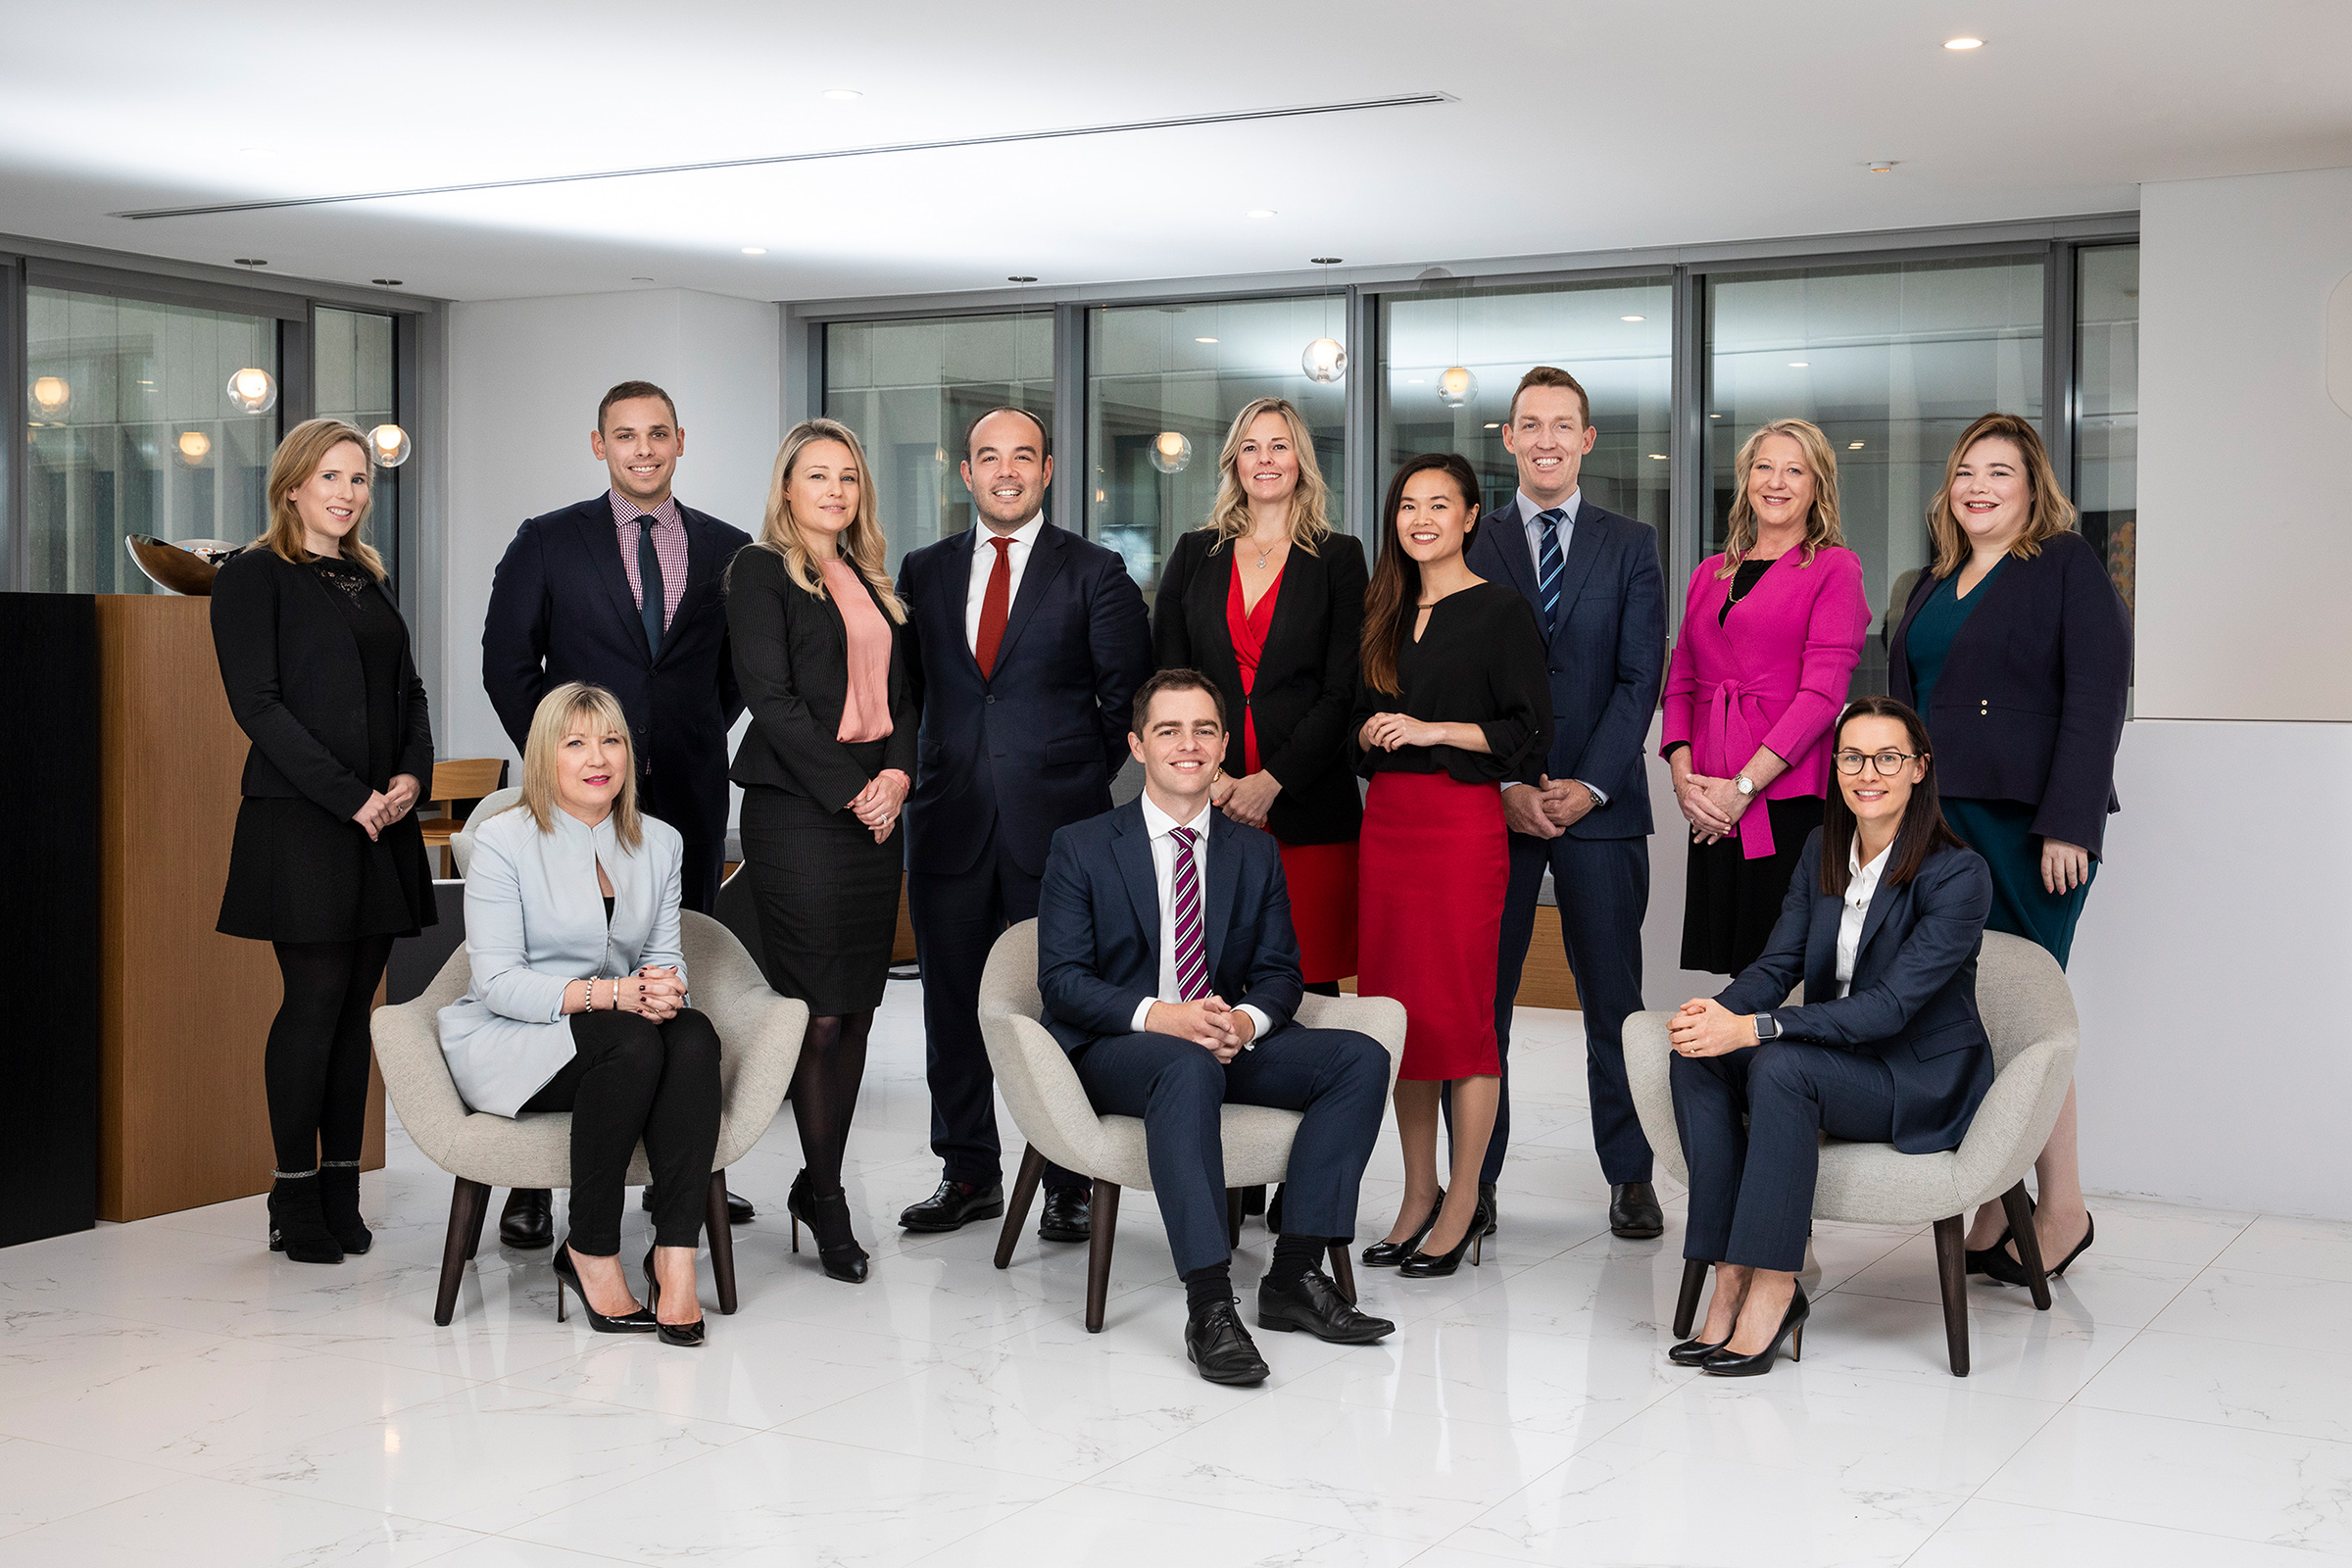 Location corporate group photography of 12 people in reception area